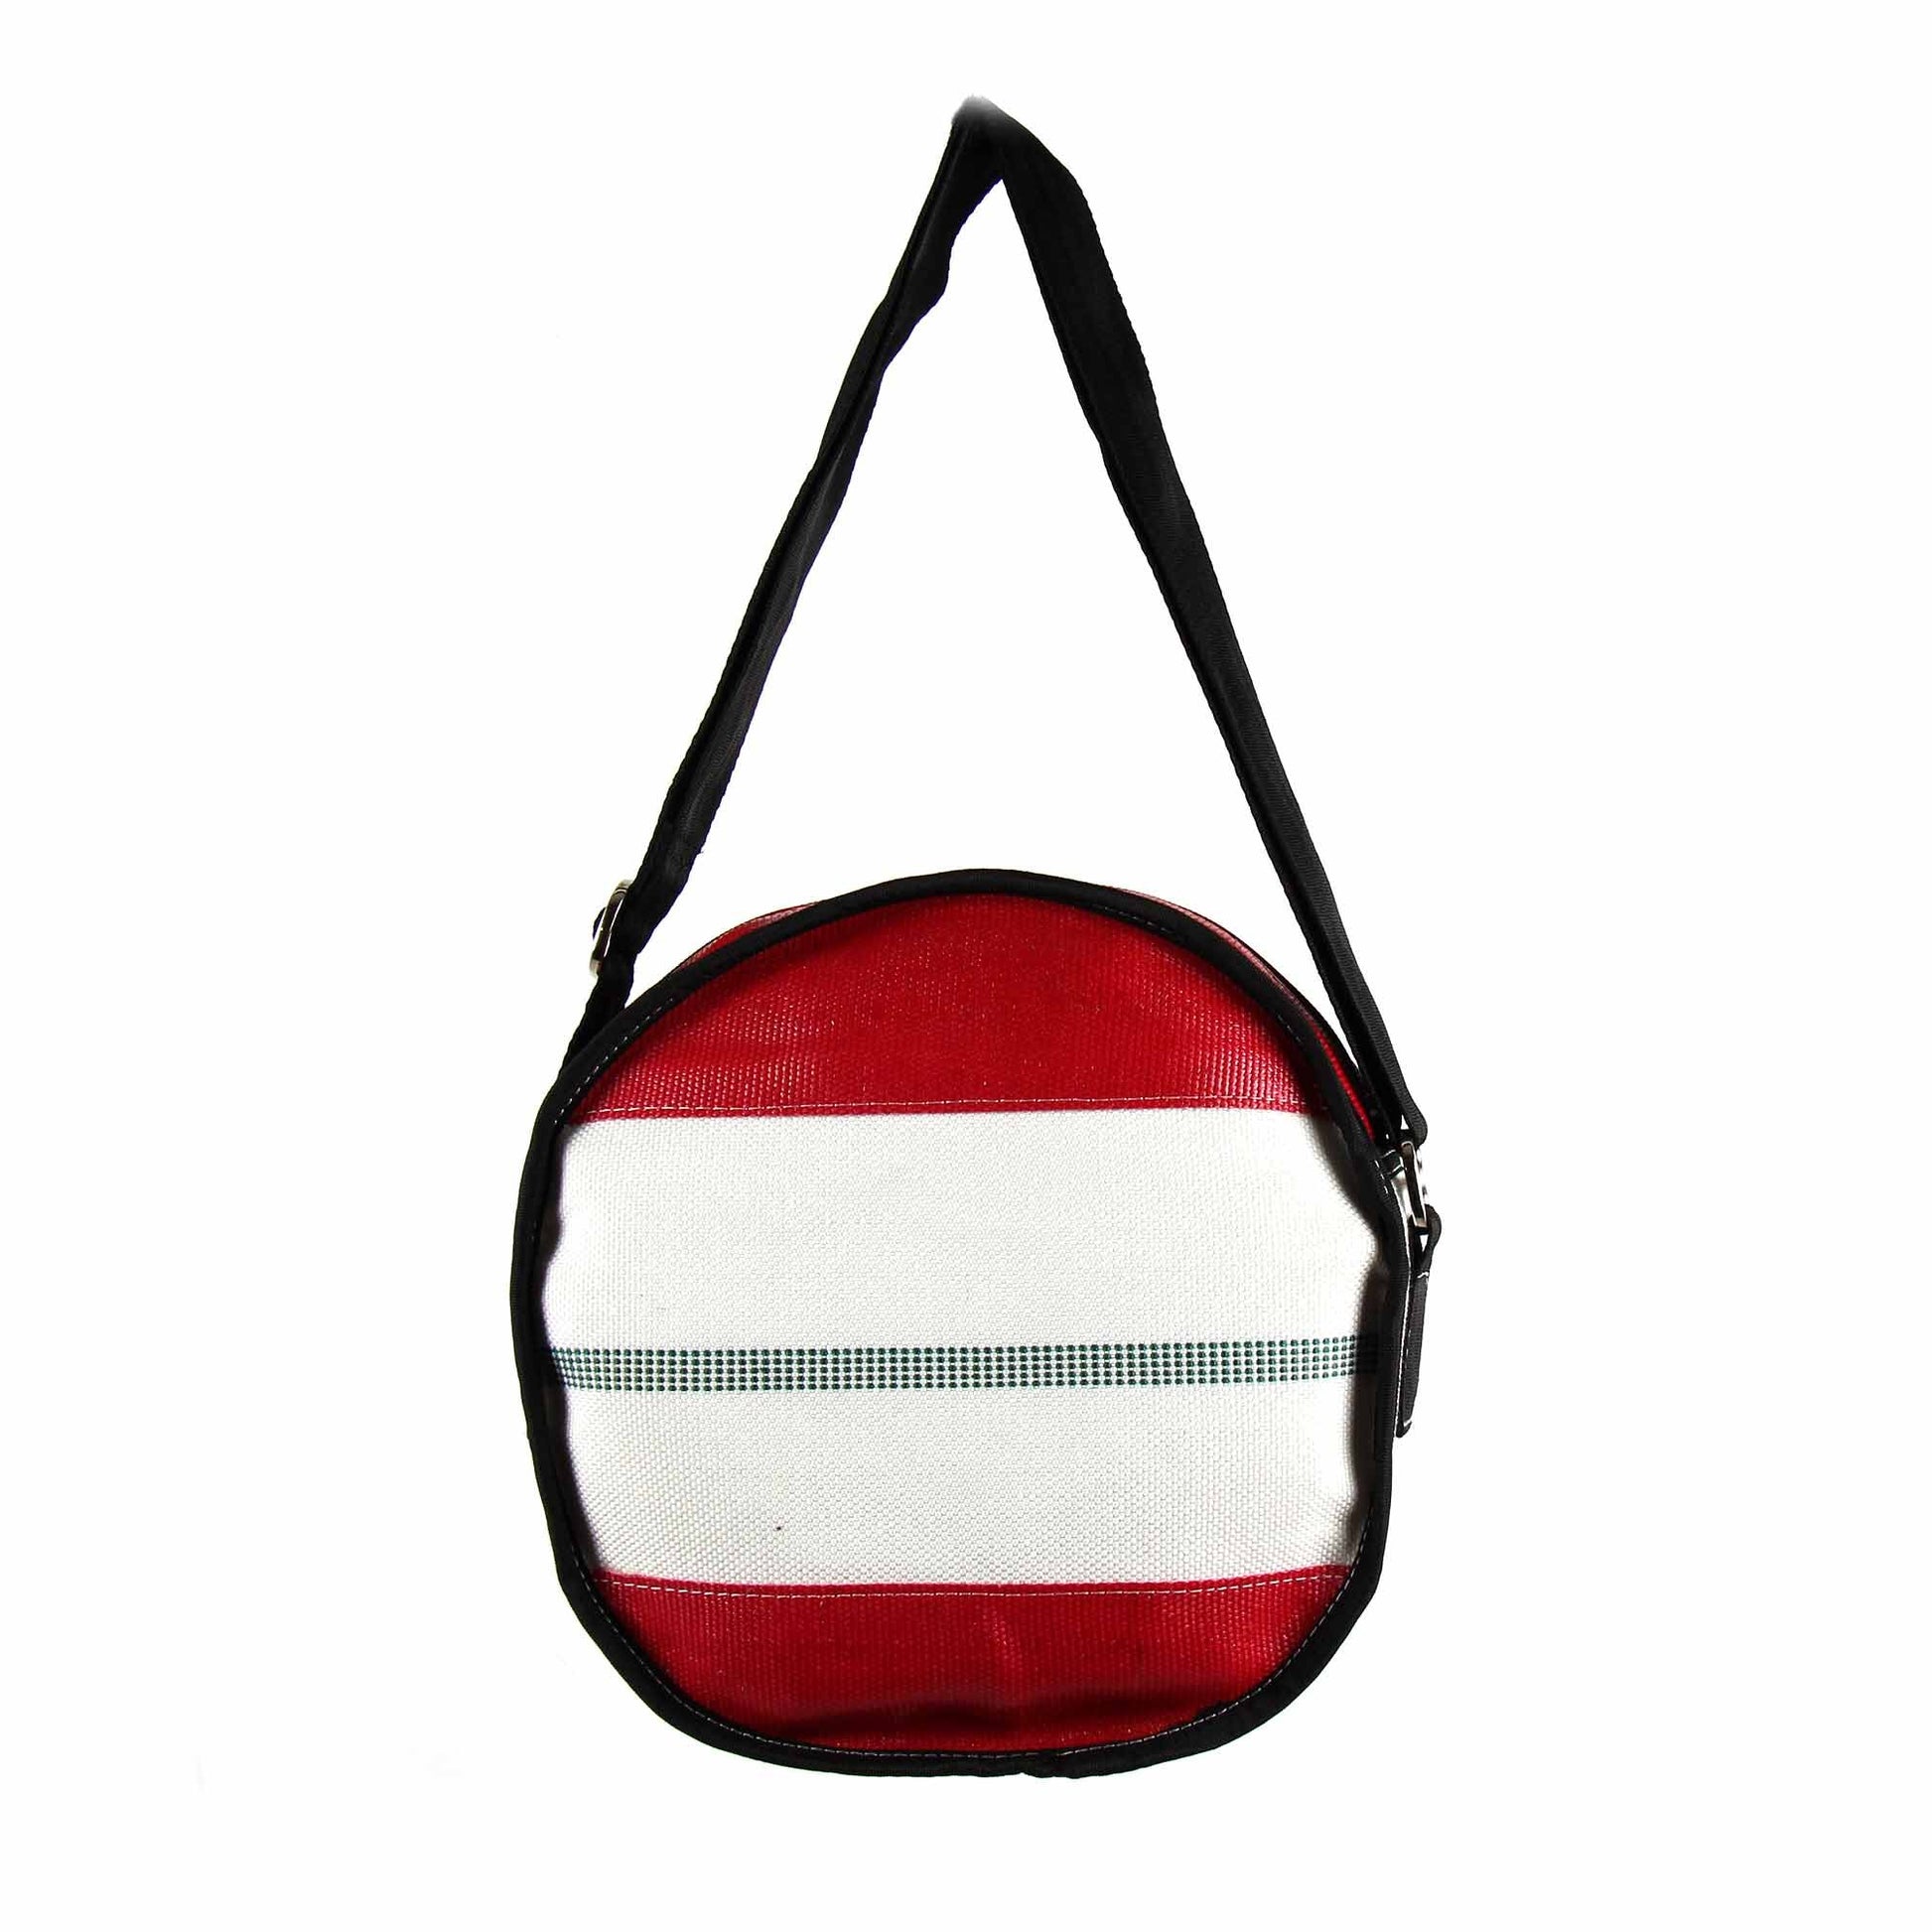 Upcycled Firehose Round Shoulder Bag - Linda Kay Gifford’s - Those Nasty Women TALK! by SWEETSurvivor